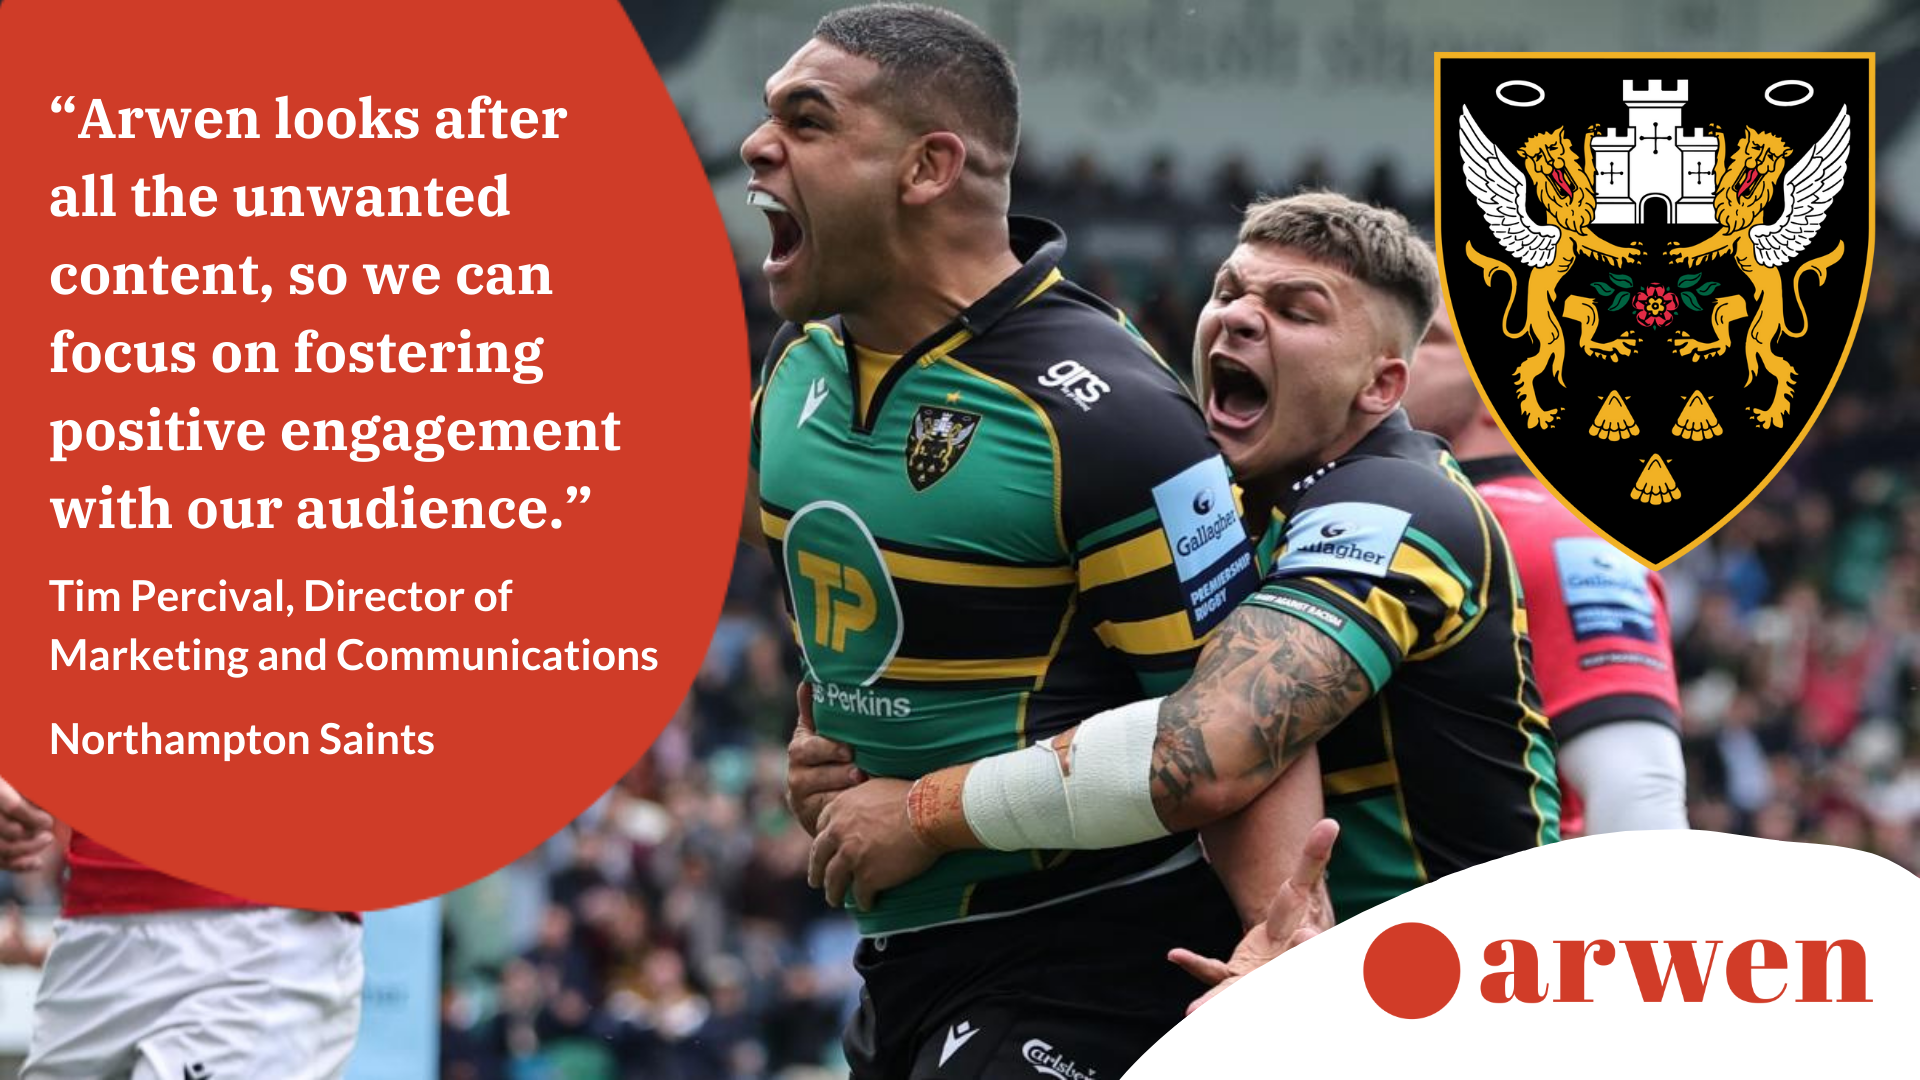 Northampton Saints use Arwen to protect players and wider community on social media